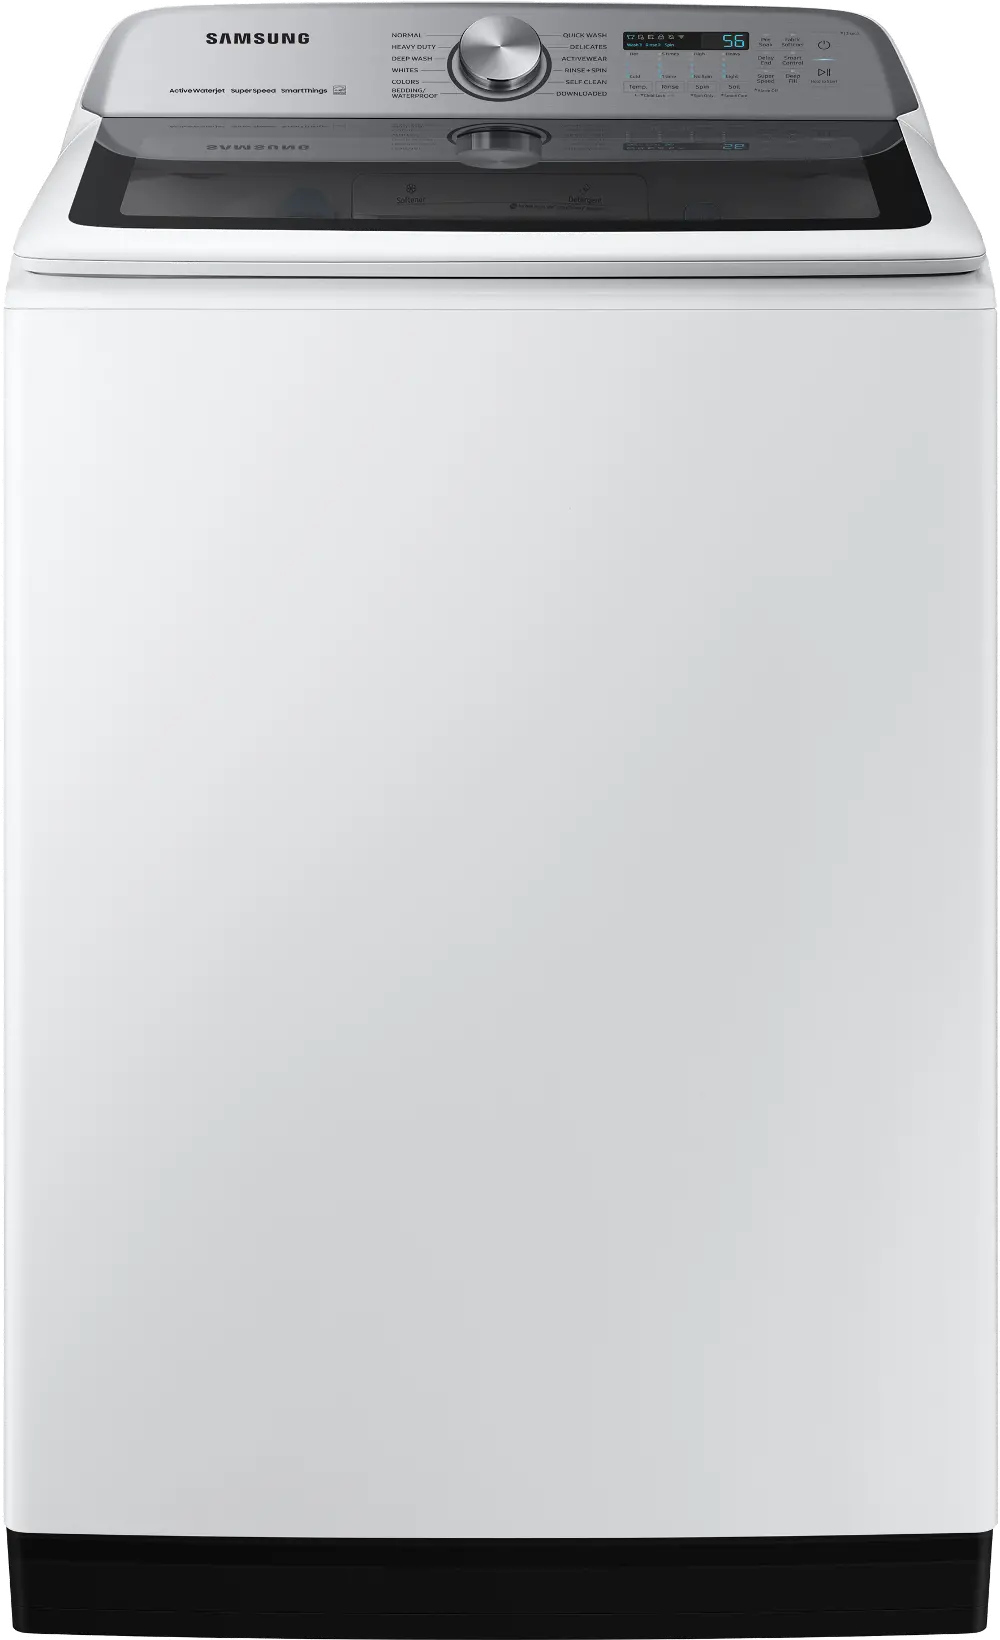 WA52A5500AW Samsung Large Capacity Top Load Washer 5.2 cu. ft. - White 52A5500-1